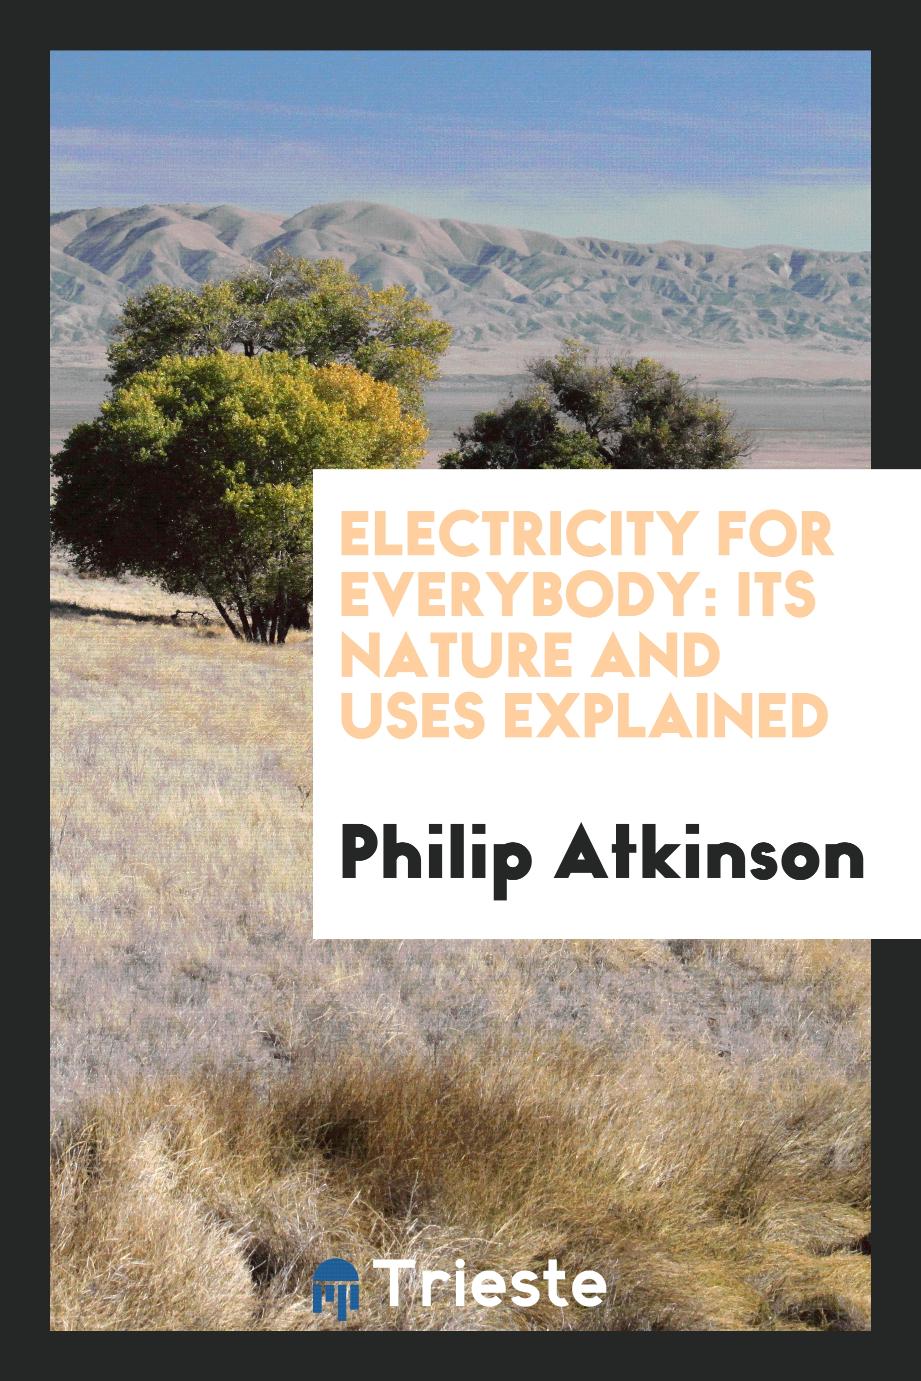 Philip Atkinson - Electricity for Everybody: Its Nature and Uses Explained